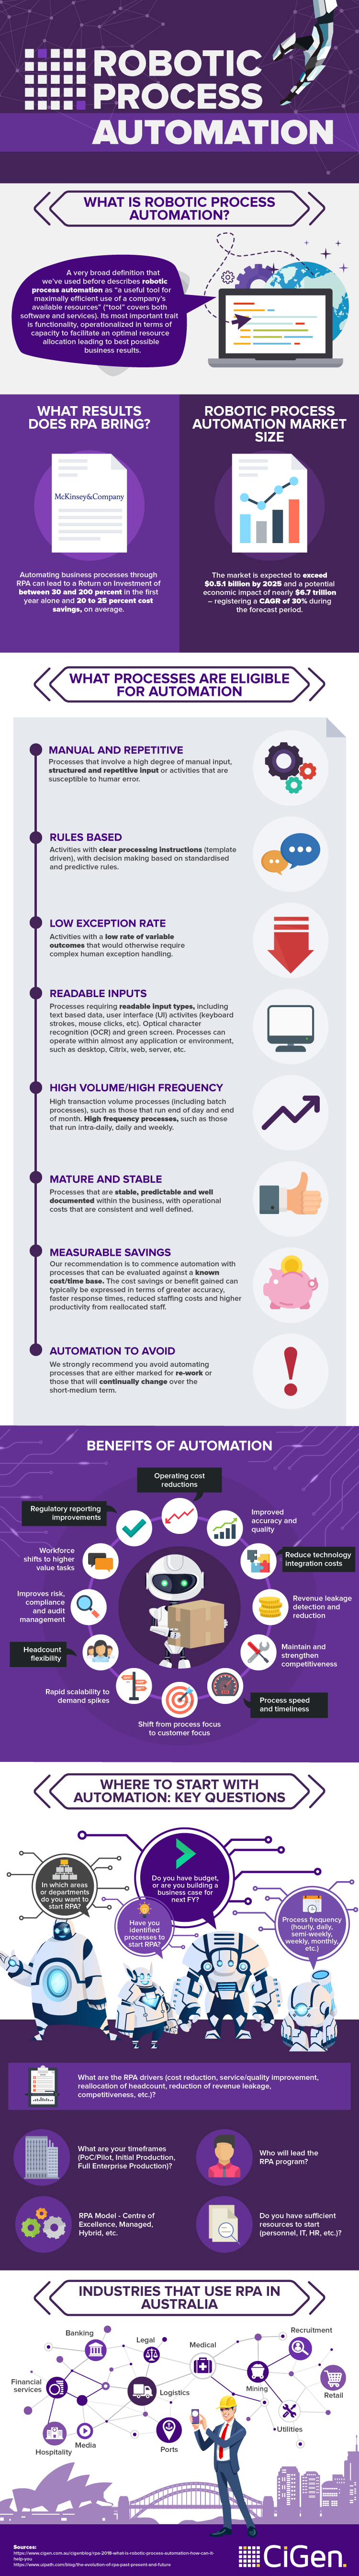 Robotic Process Automation - infographic